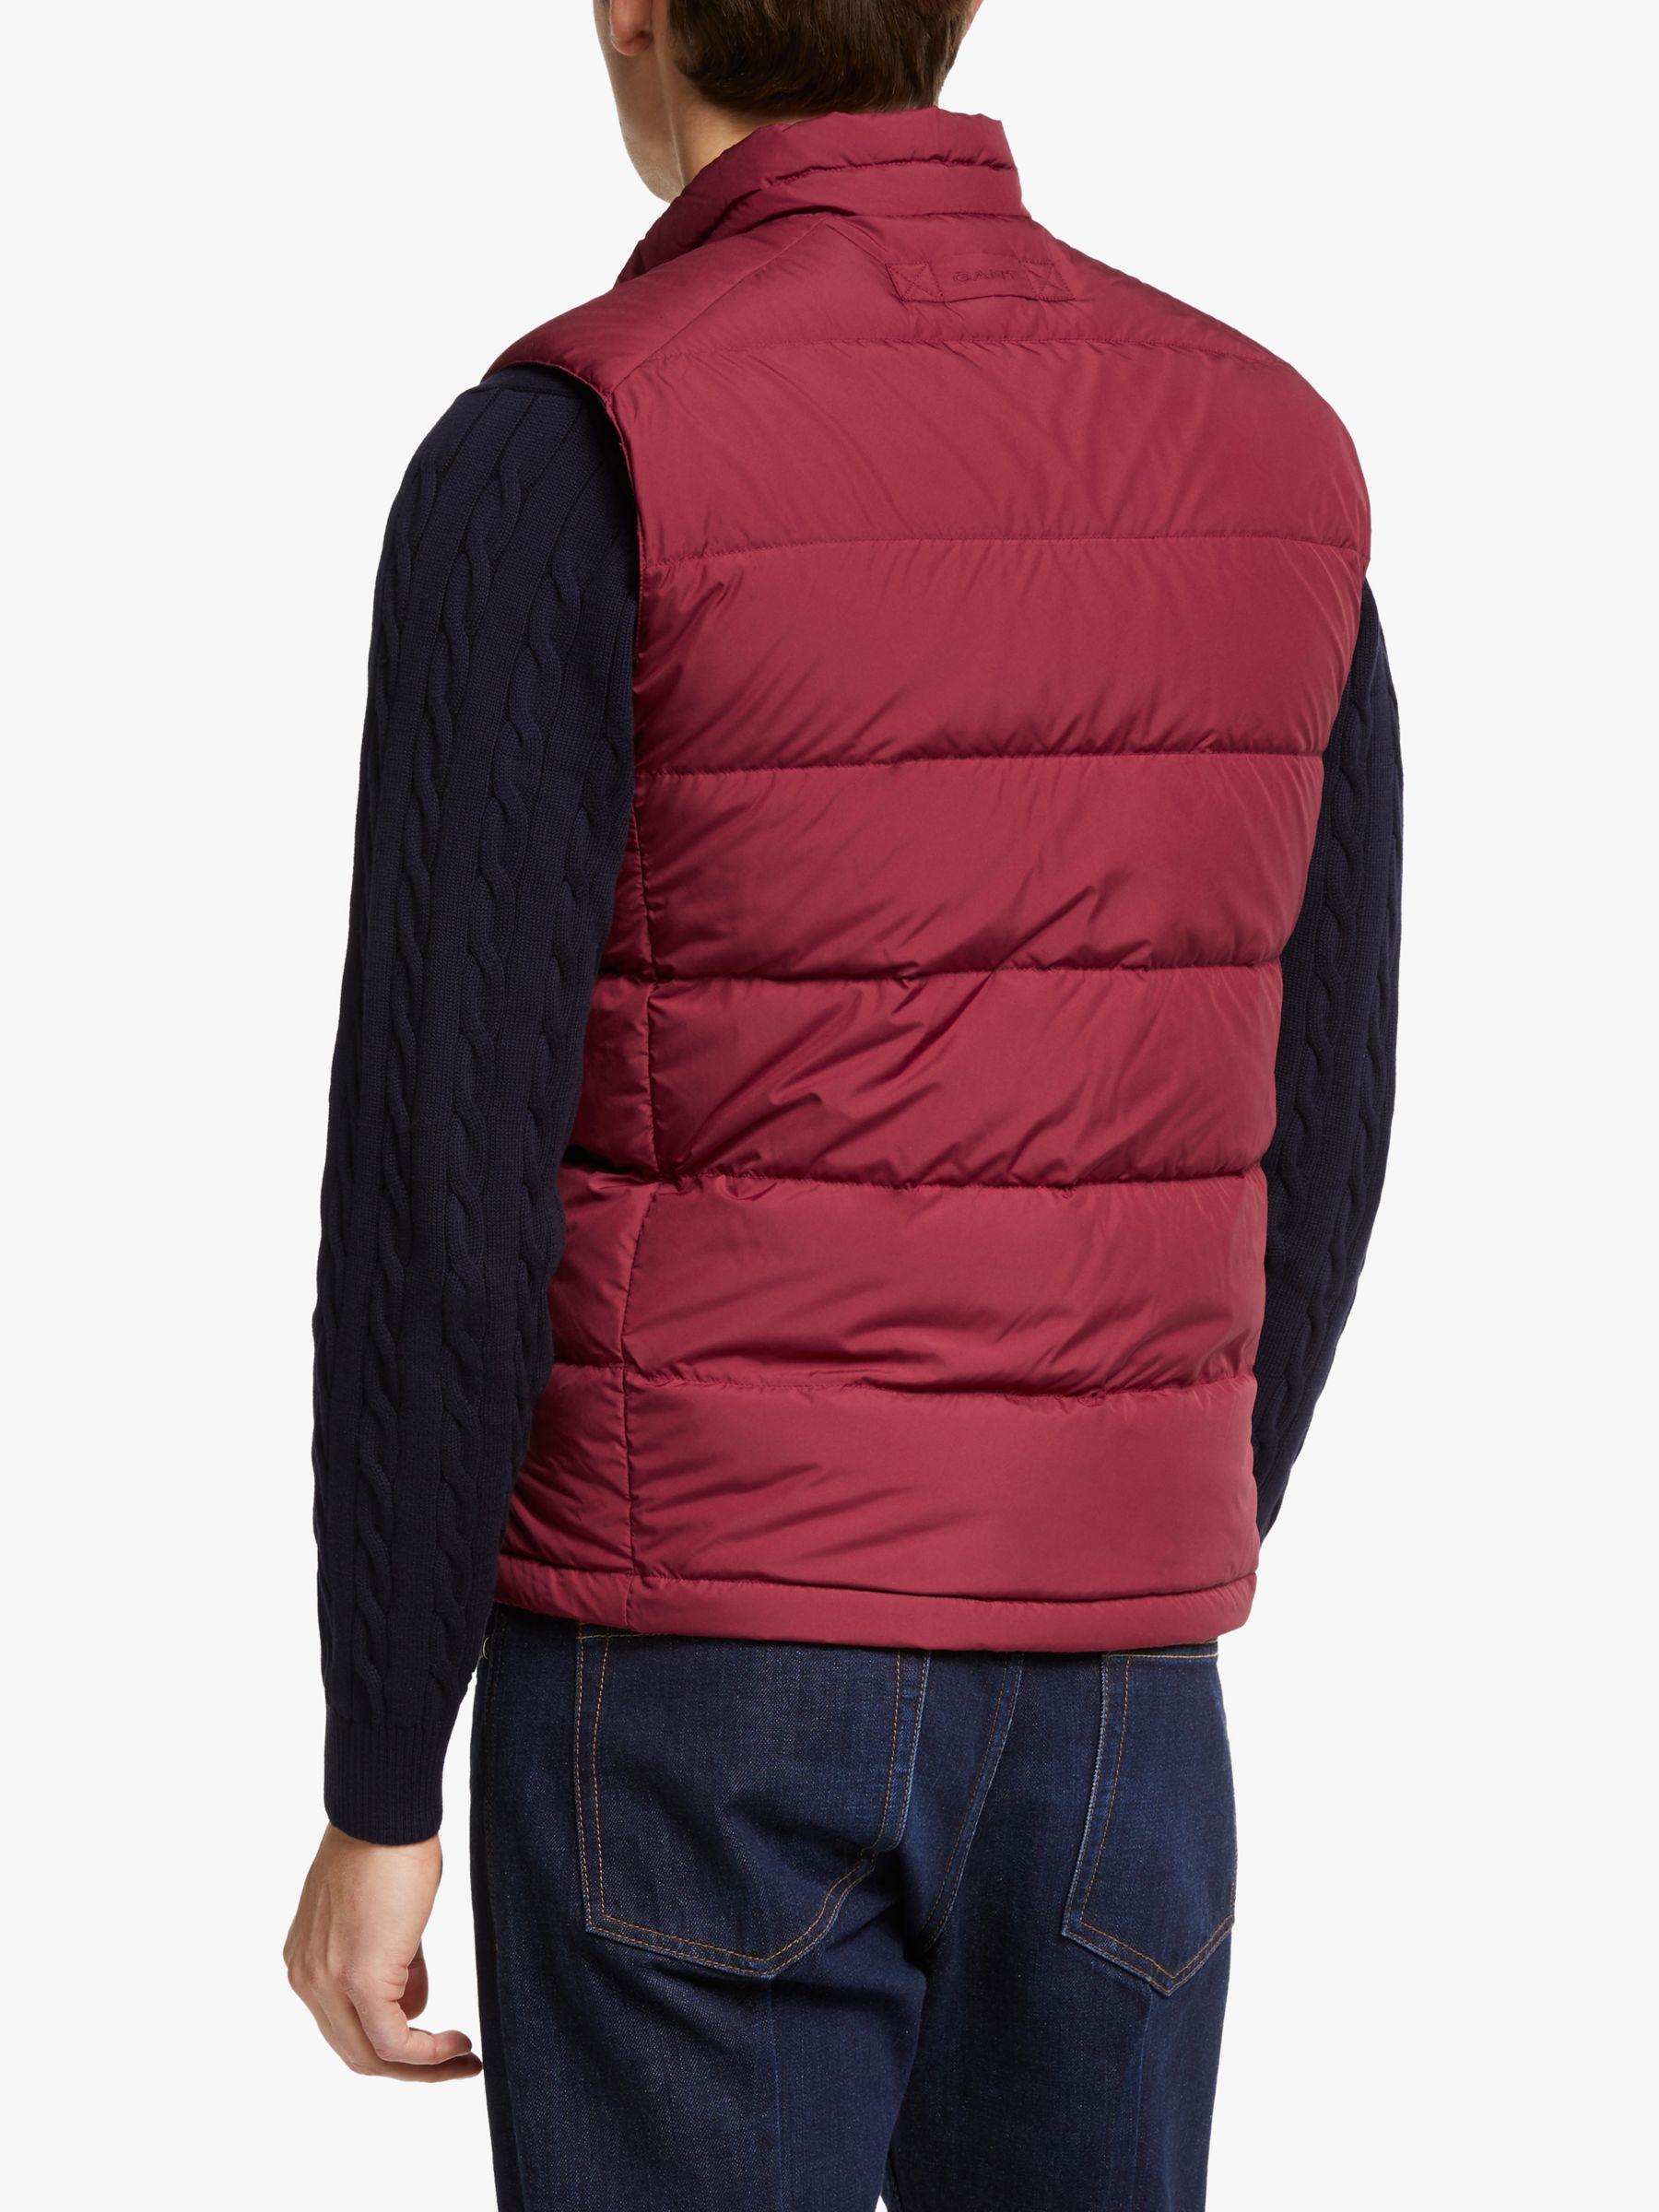 GANT Synthetic Panel Down Gilet in Mahogany Red (Red) for Men - Lyst